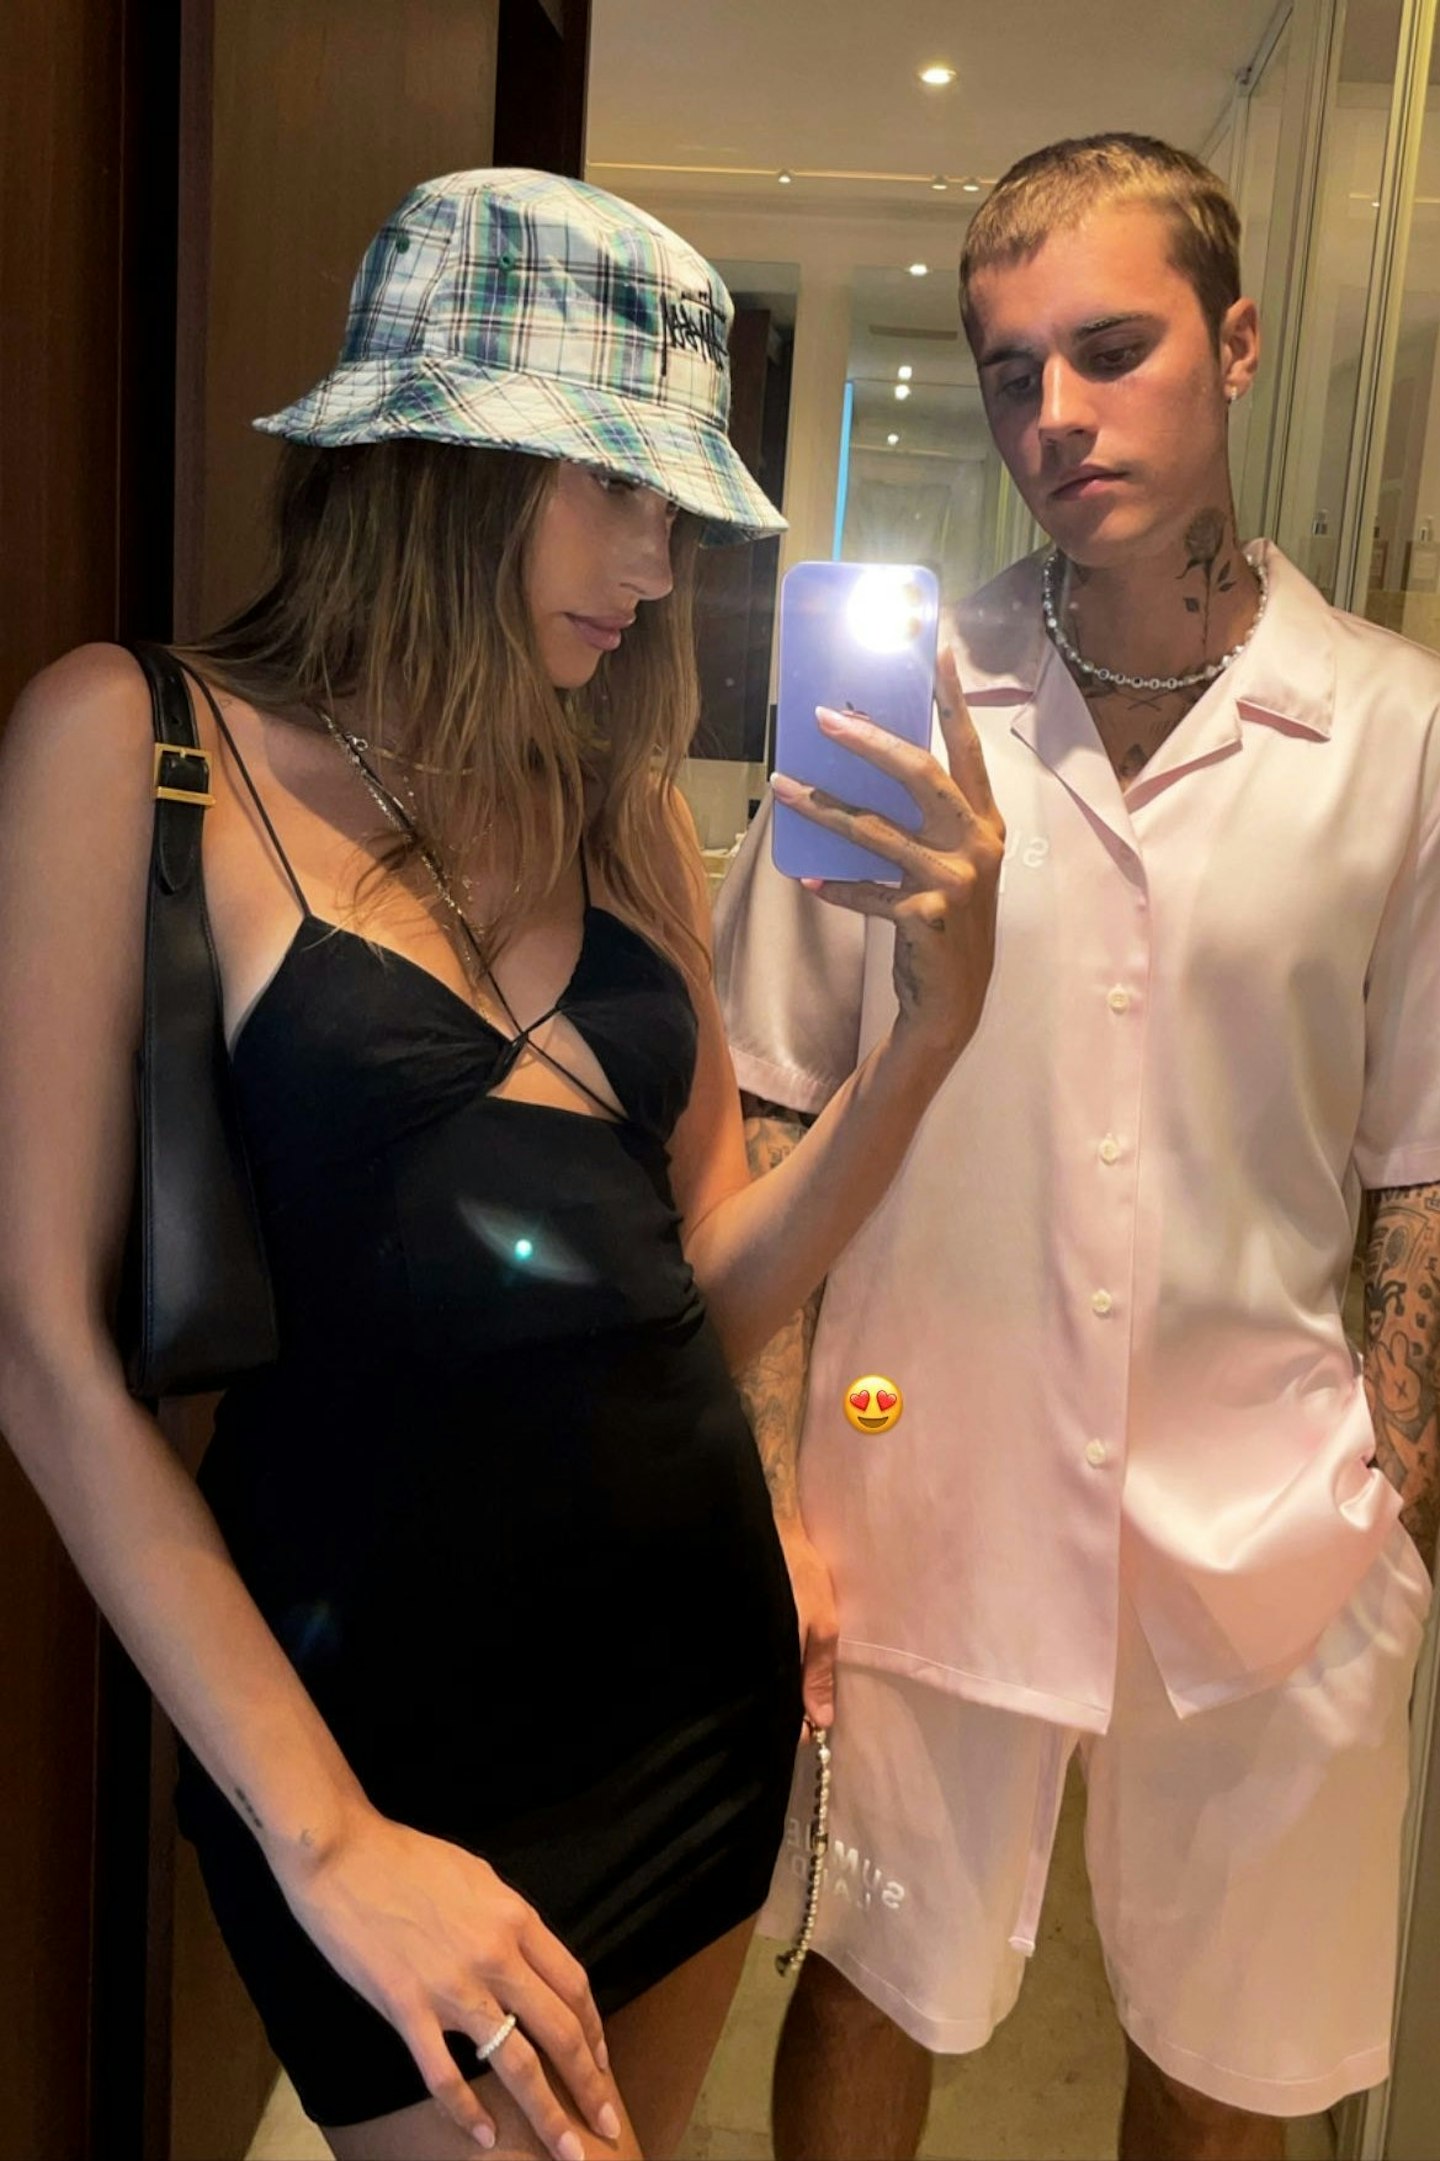 Hailey Bieber taking a selfie of her and Justin Bieber